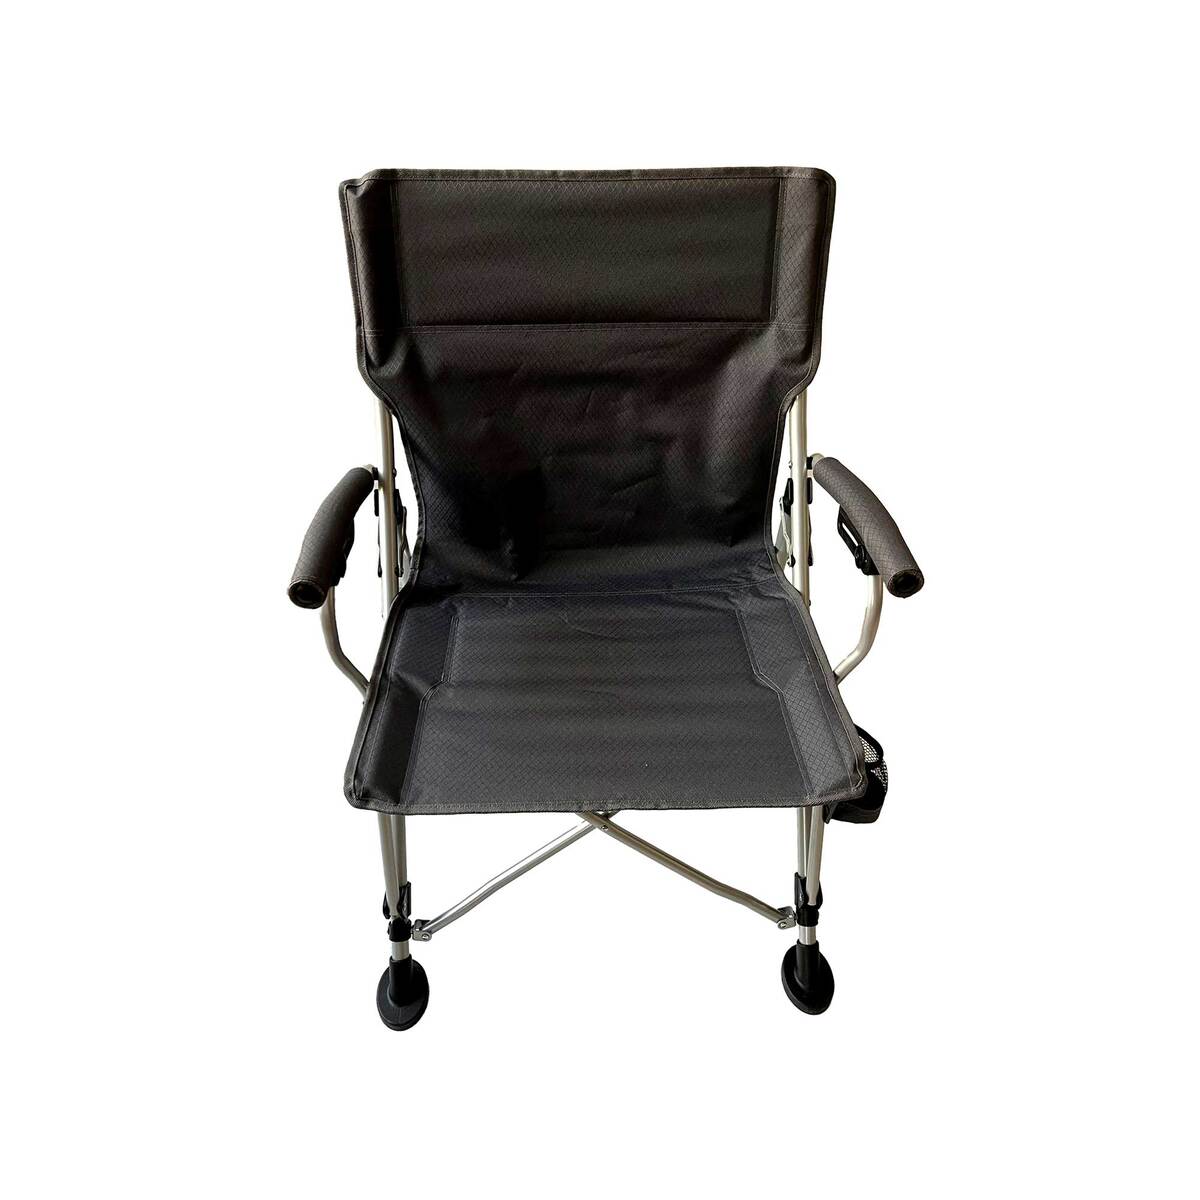 Royal Relax Camping Chair C104S Grey